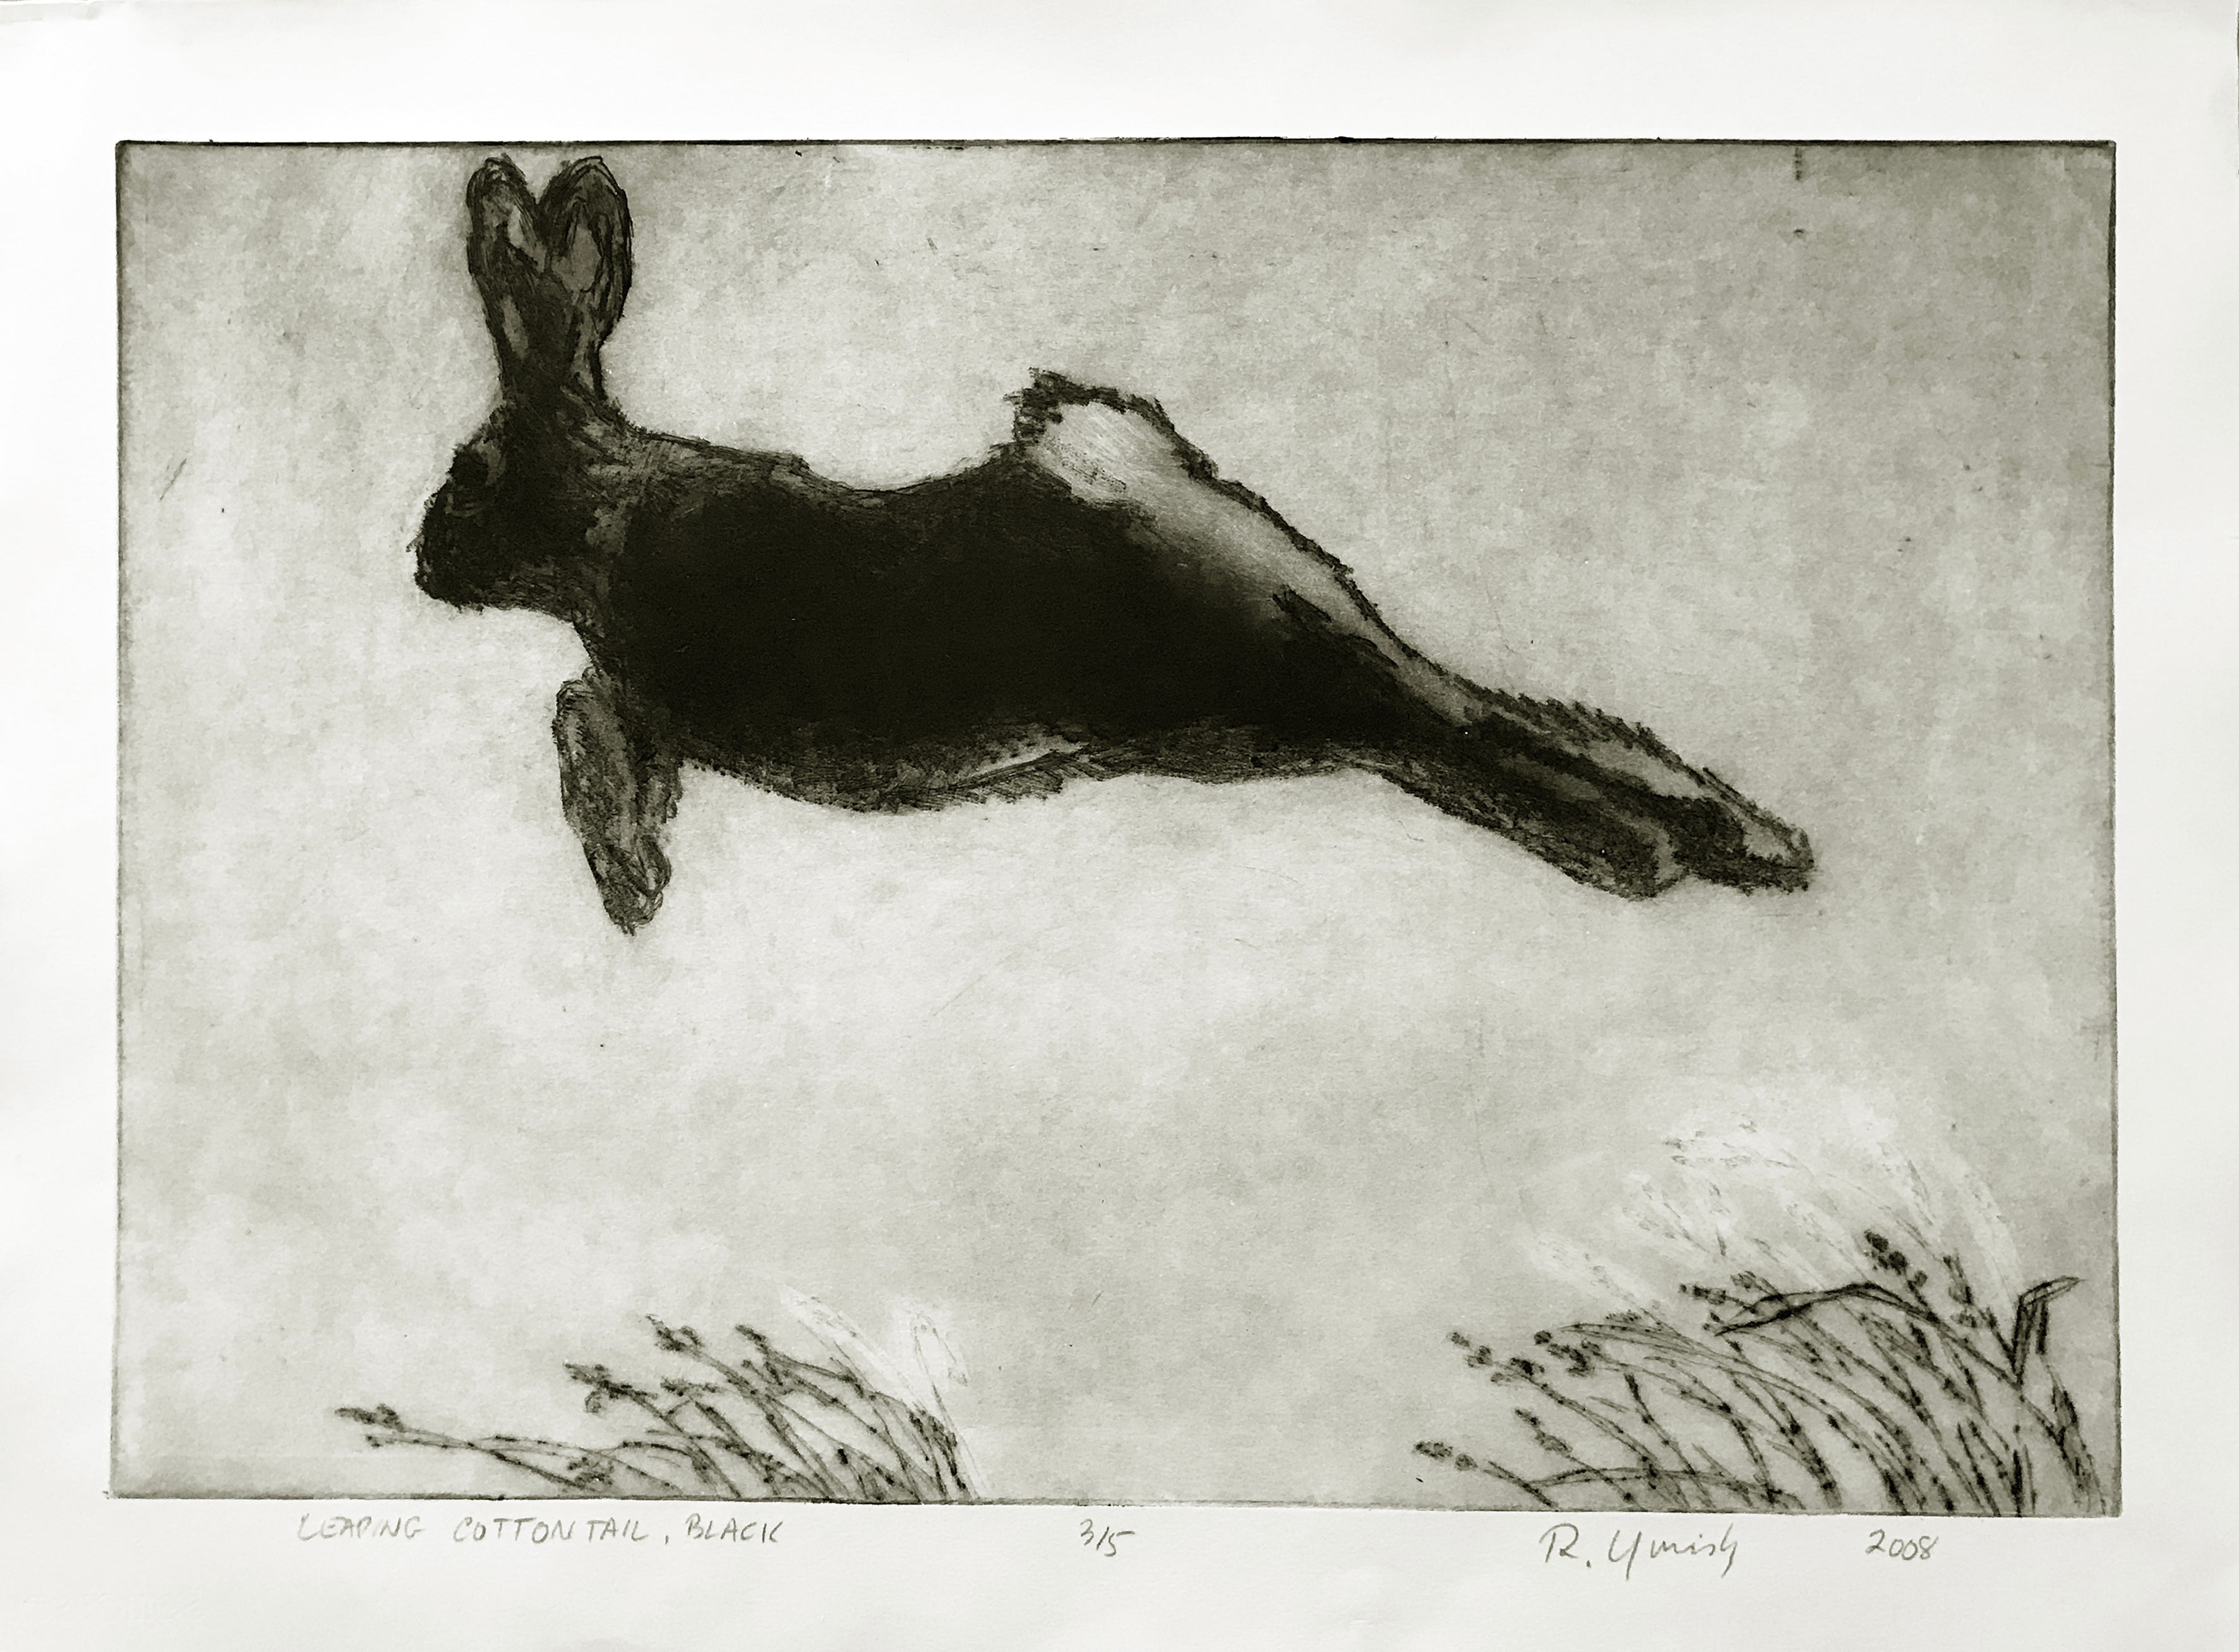 Leaping Cottontail (black)